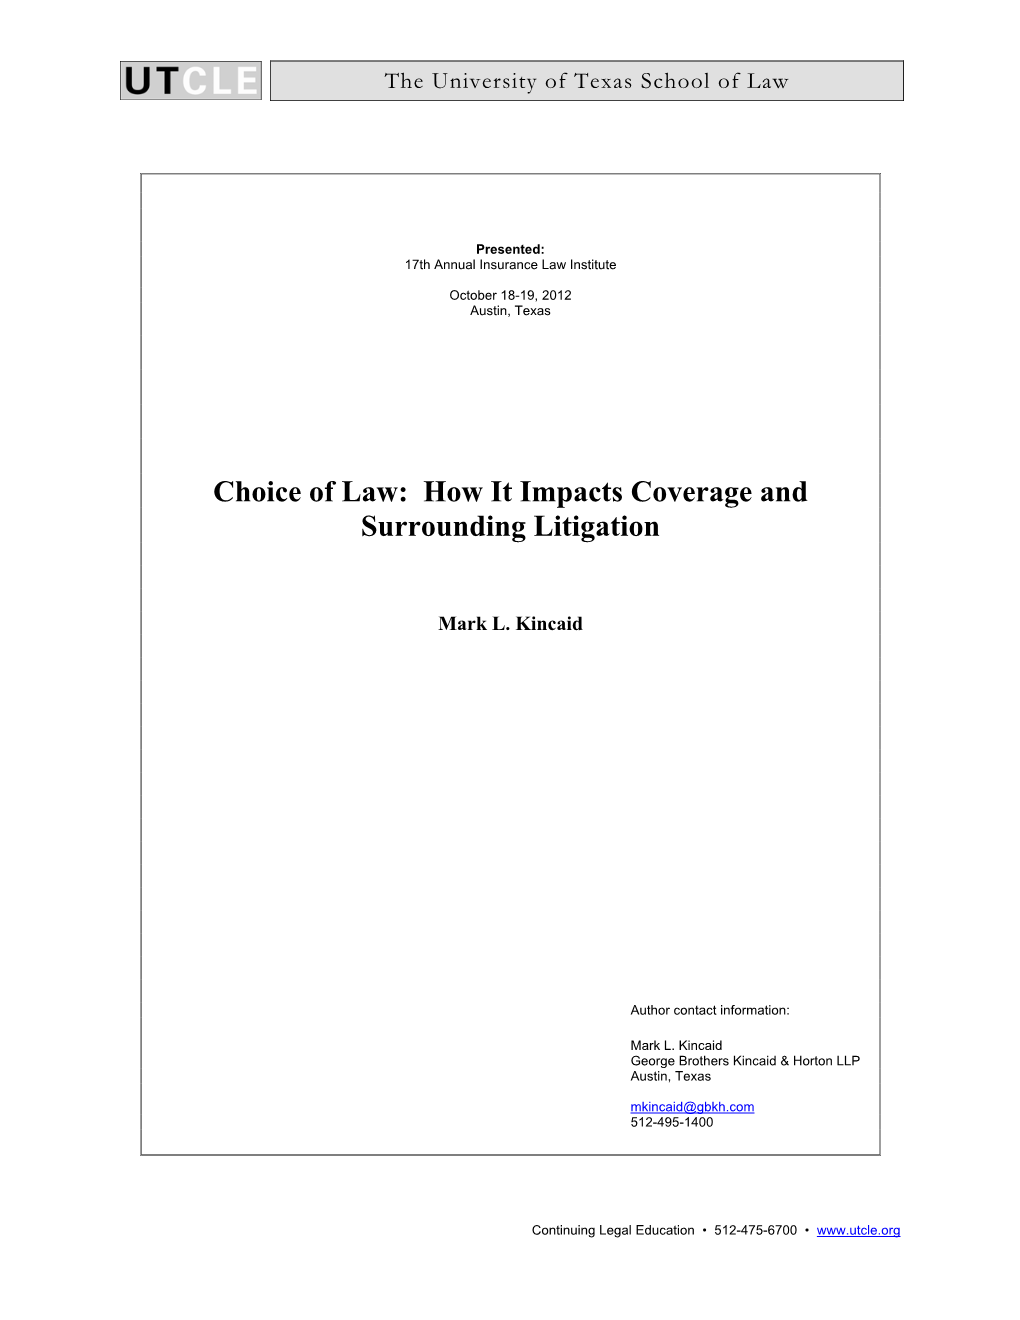 Choice of Law: How It Impacts Coverage and Surrounding Litigation